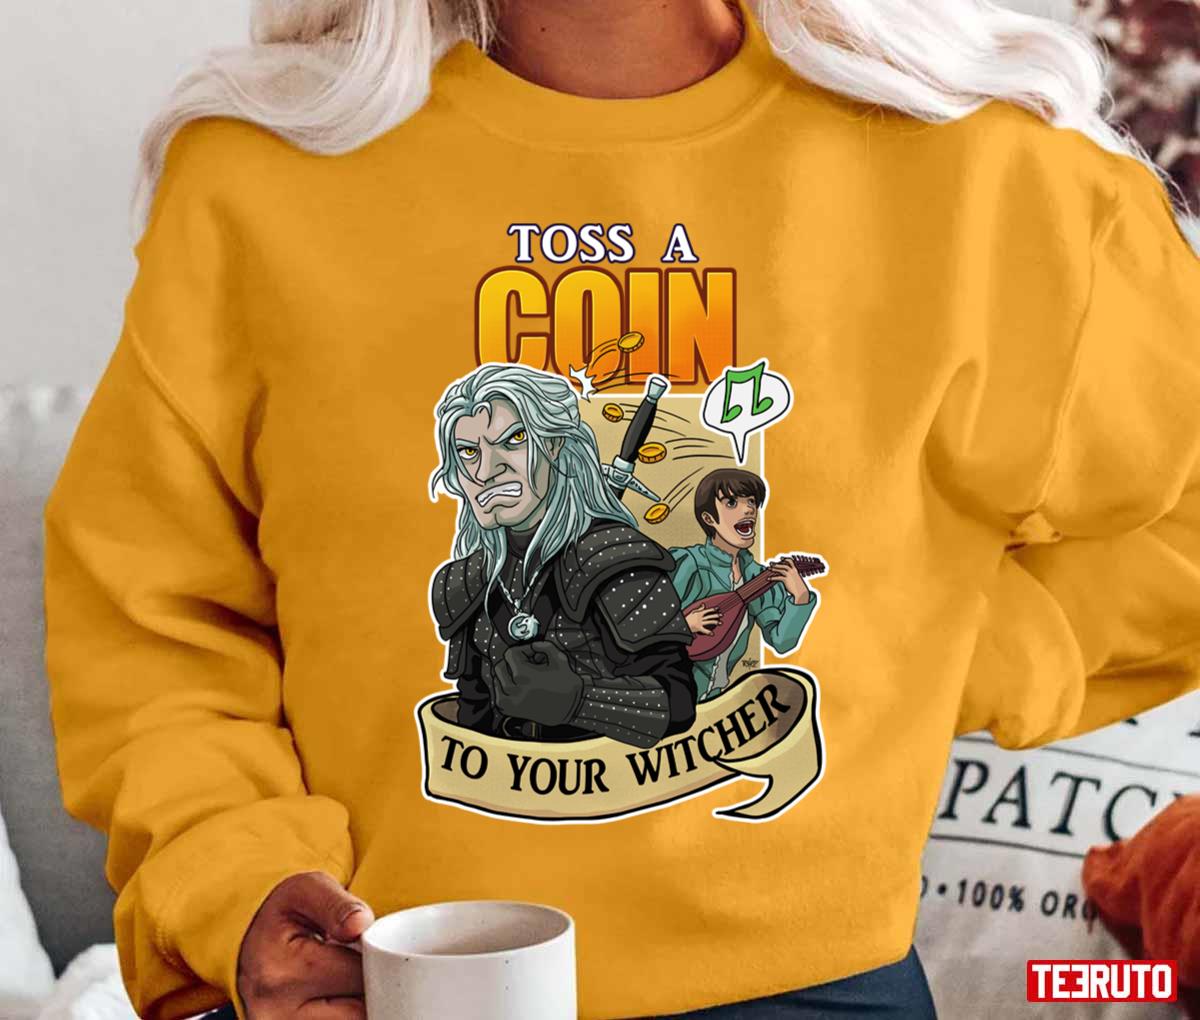 Toss A Coin Into Your Witcher Funny Geralt Unisex T-Shirt